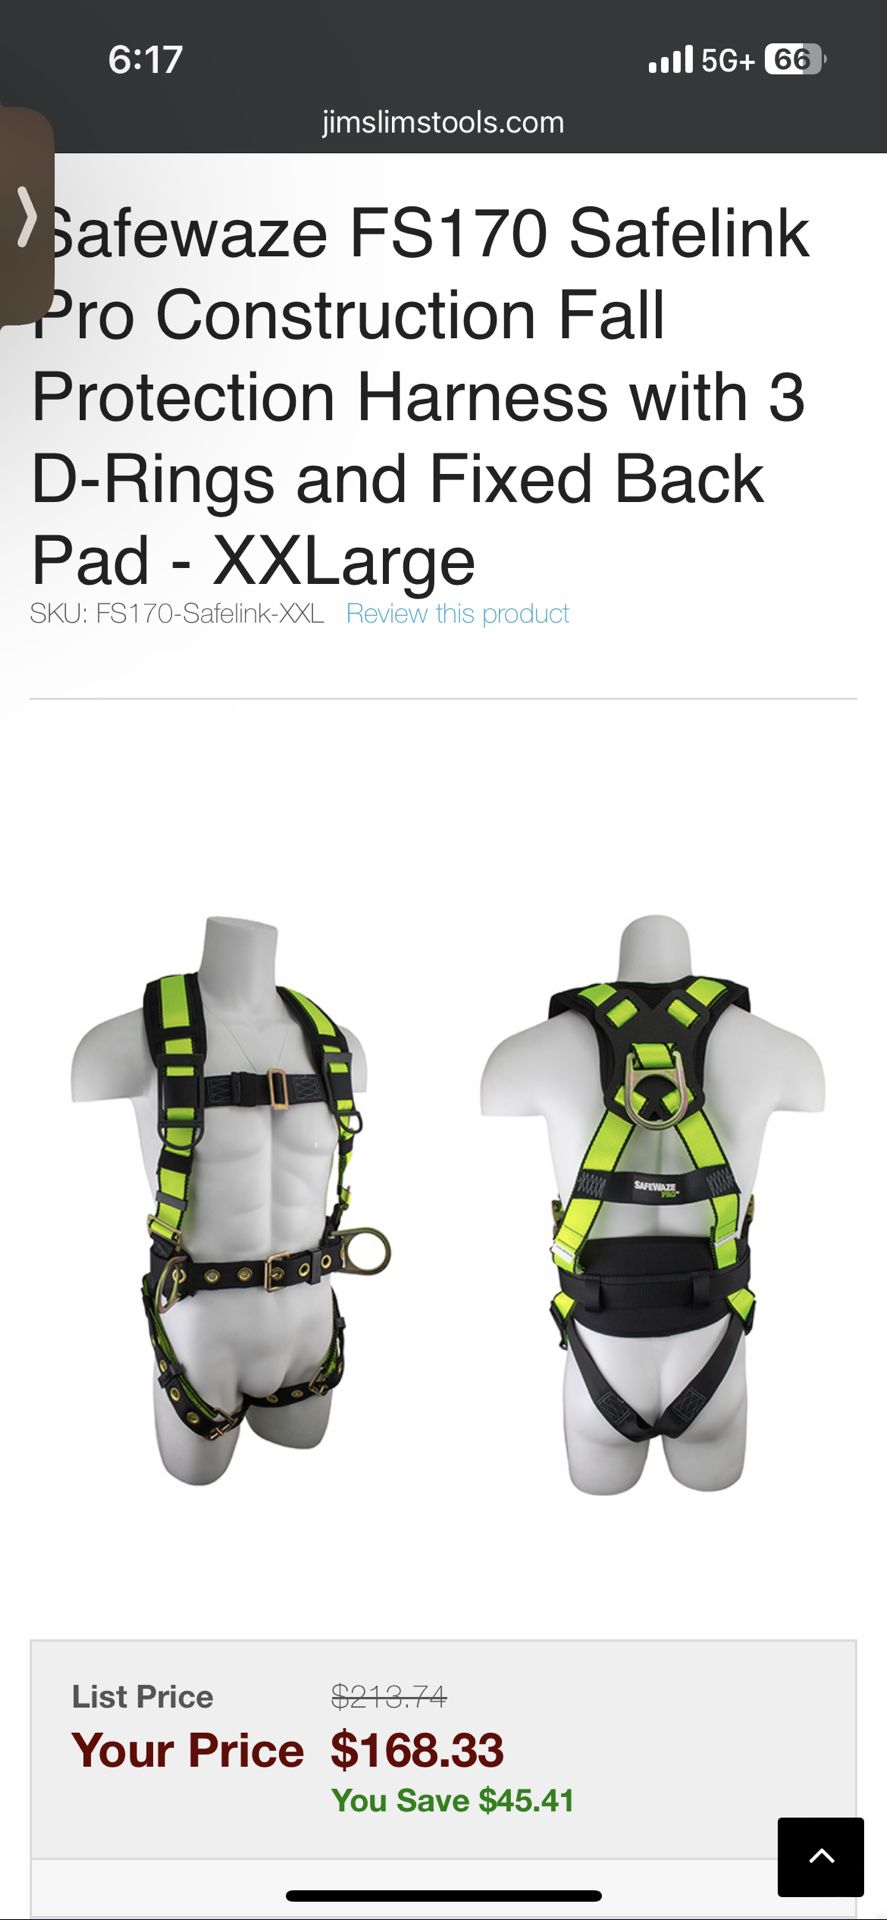 GREAT CONDITION Large Full Body Harness With 3D Rings.